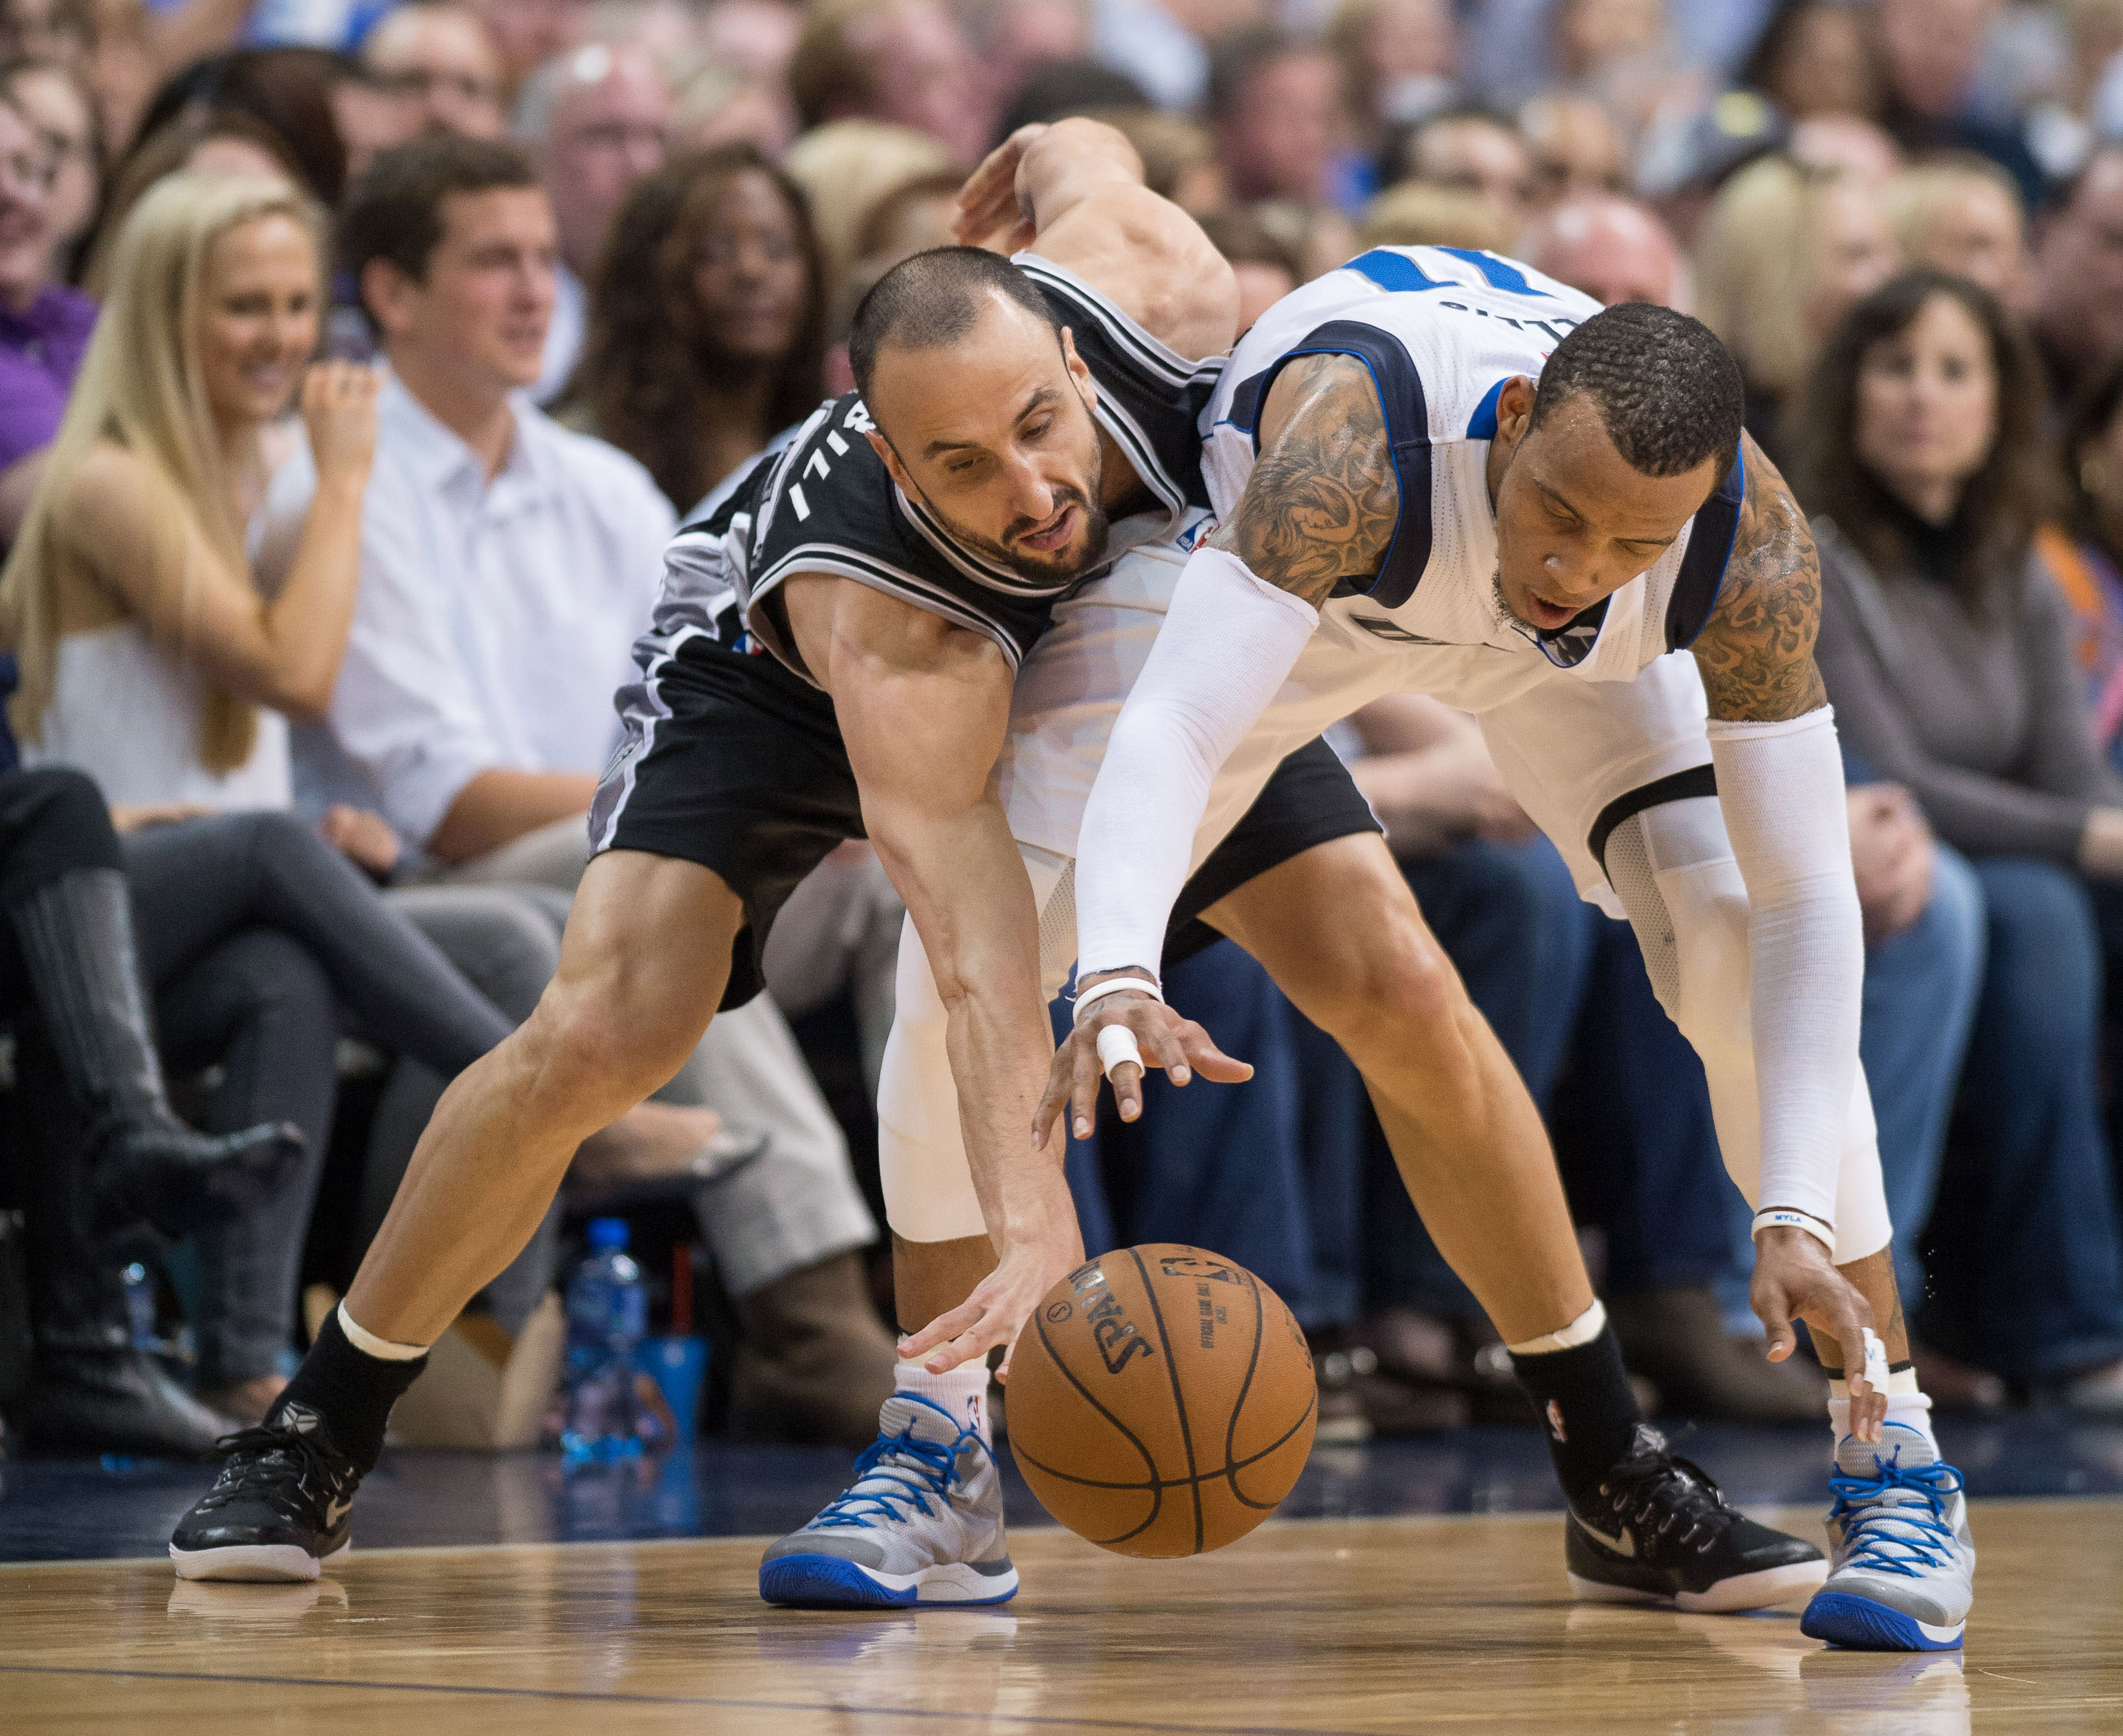 Mar 24, 2015; Dallas, TX, USA; San Antonio Spurs guard Manu Ginobili (20) tires to steal the ball away from Dallas Mavericks guard Monta Ellis (11) during the second half at the American Airlines Center. The Mavericks won 101-94. (Jerome Miron-USA TODAY Sports)